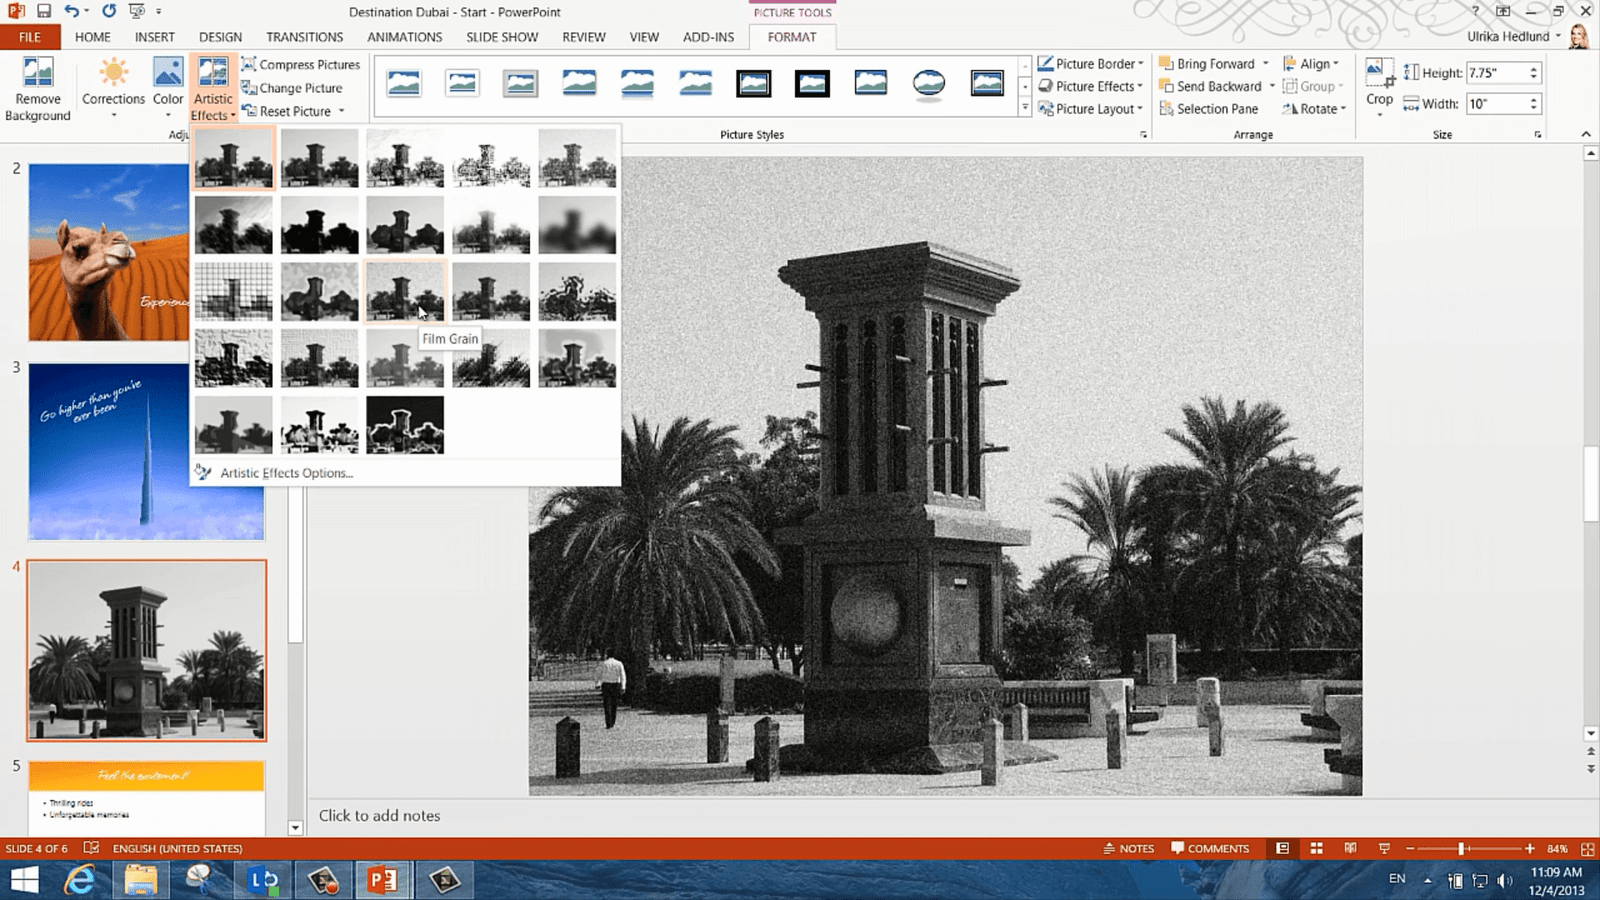 How to make a picture look old in PowerPoint 2013